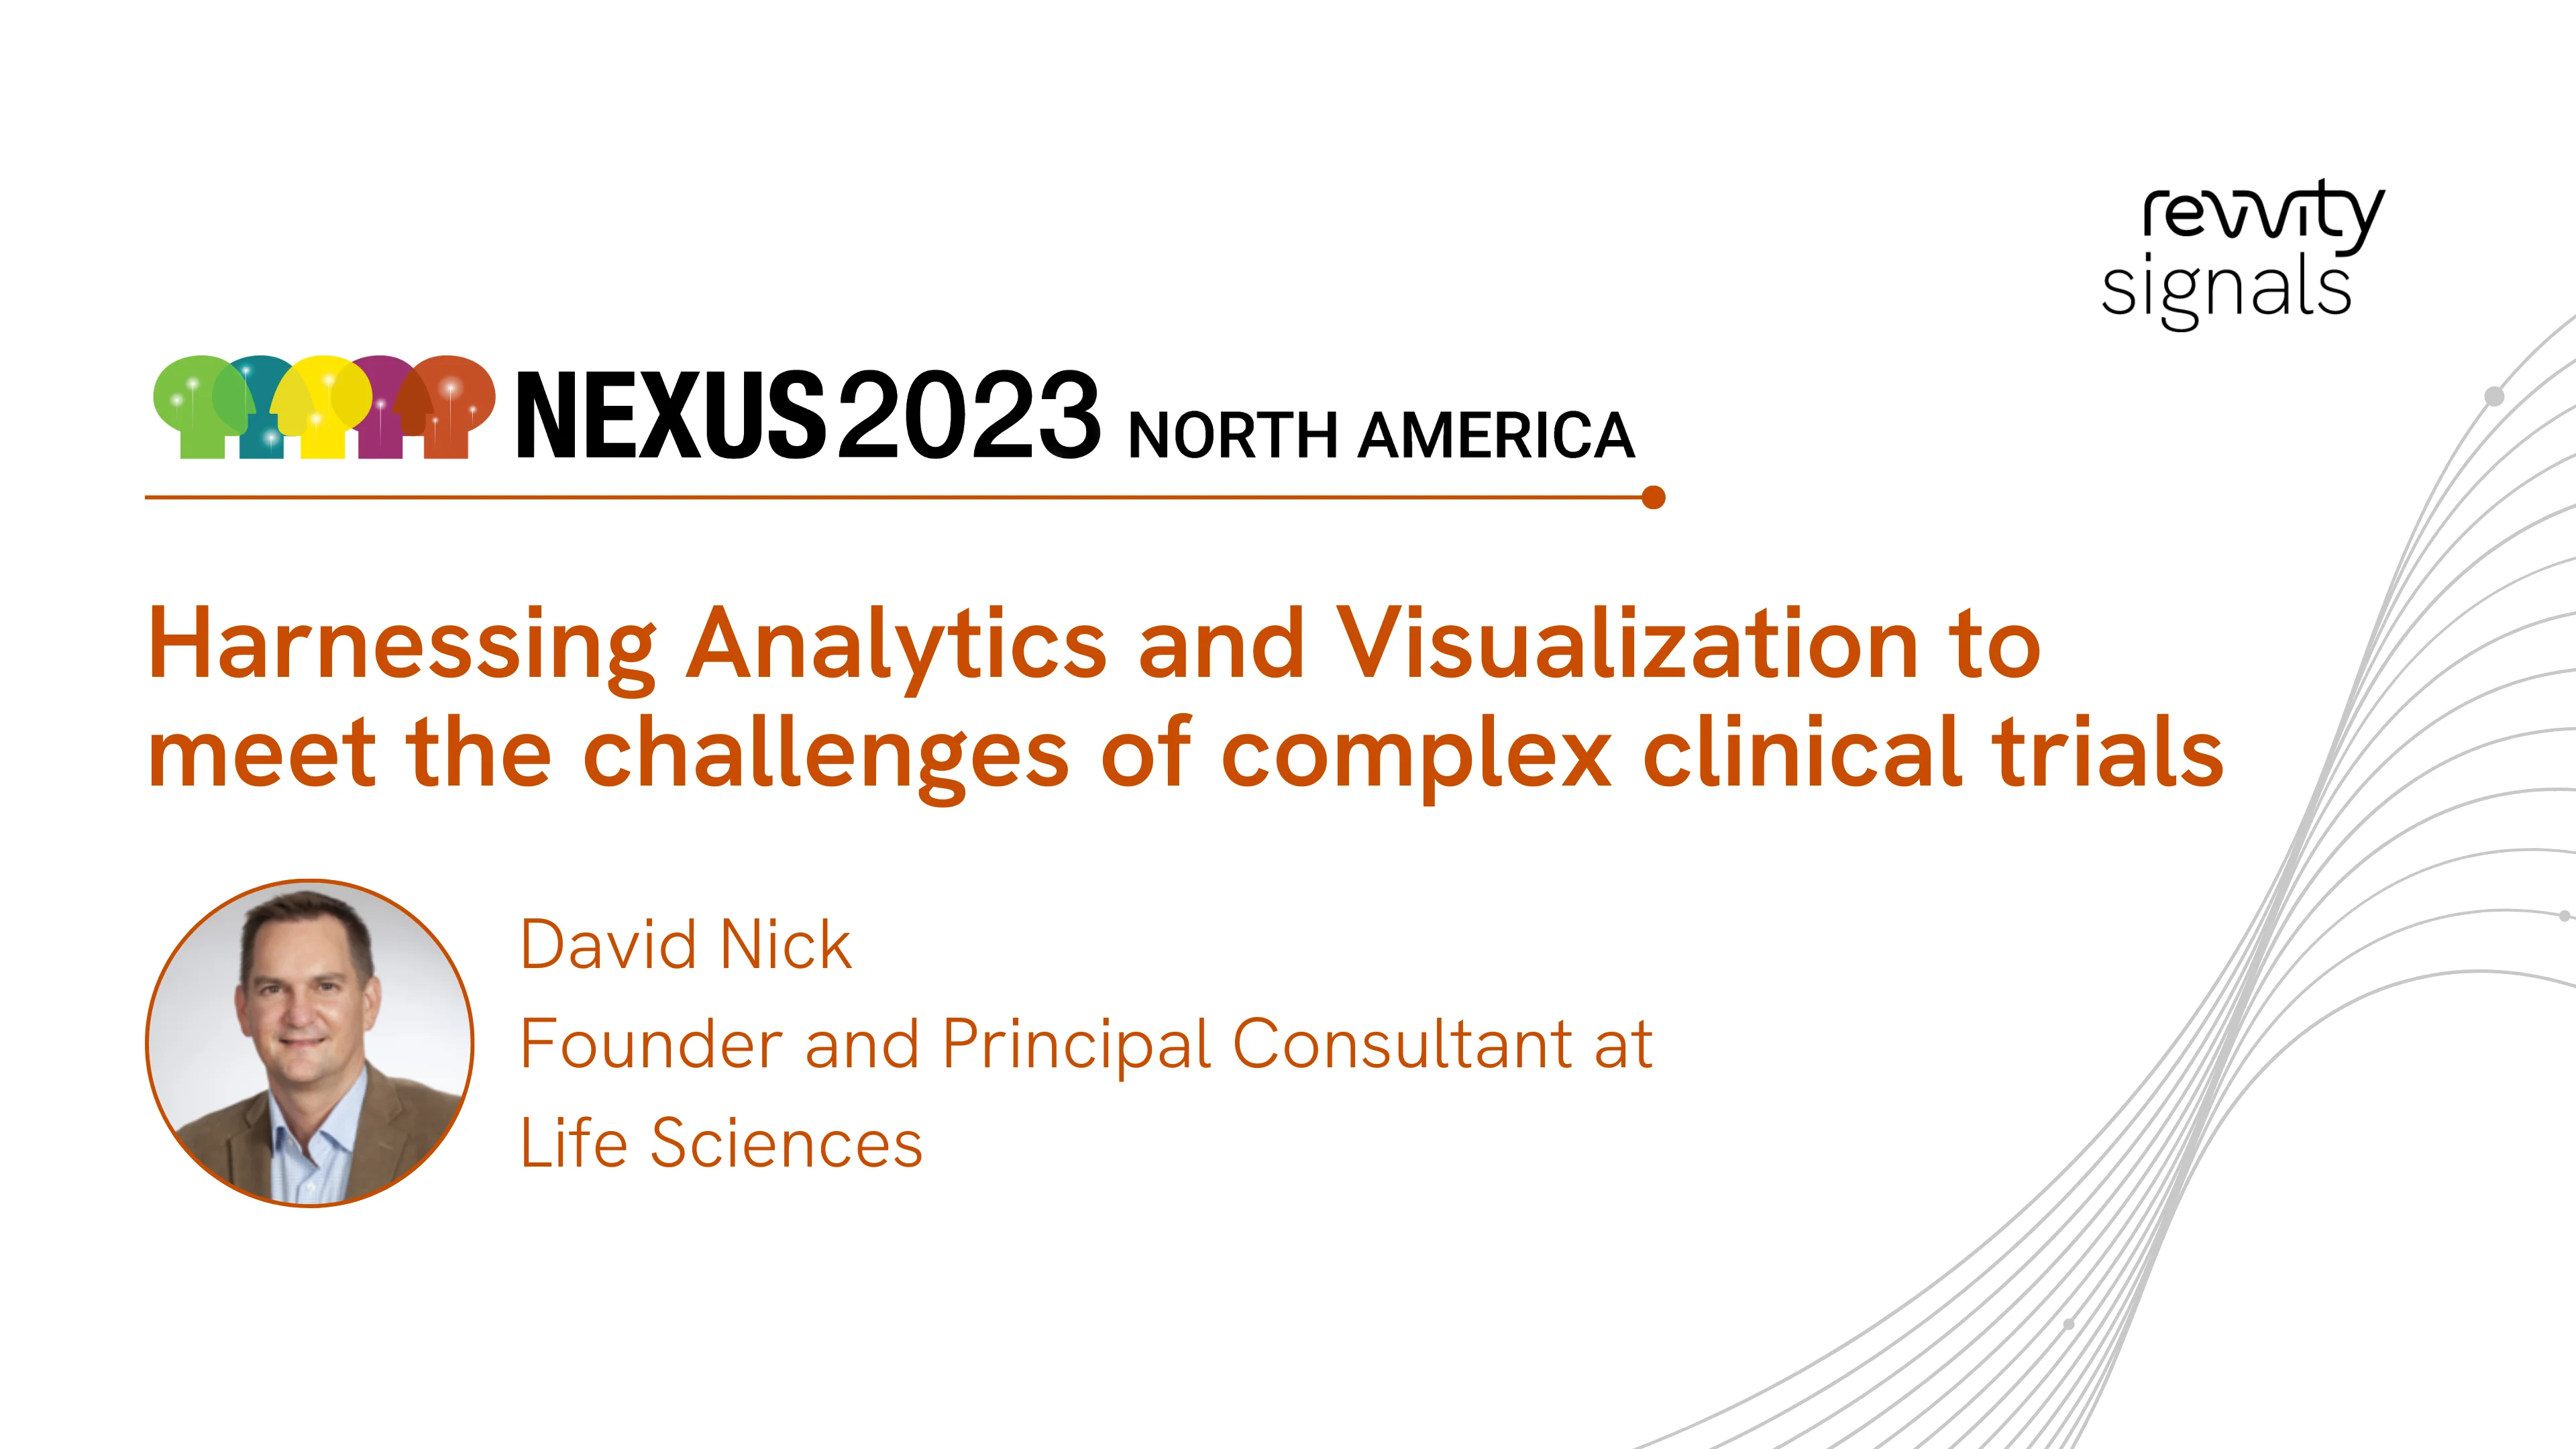 Watch Day 2, NA NEXUS 2023 - Harnessing Analytics and Visualization to meet the Challenges of Complex Clinical Trials on Vimeo.